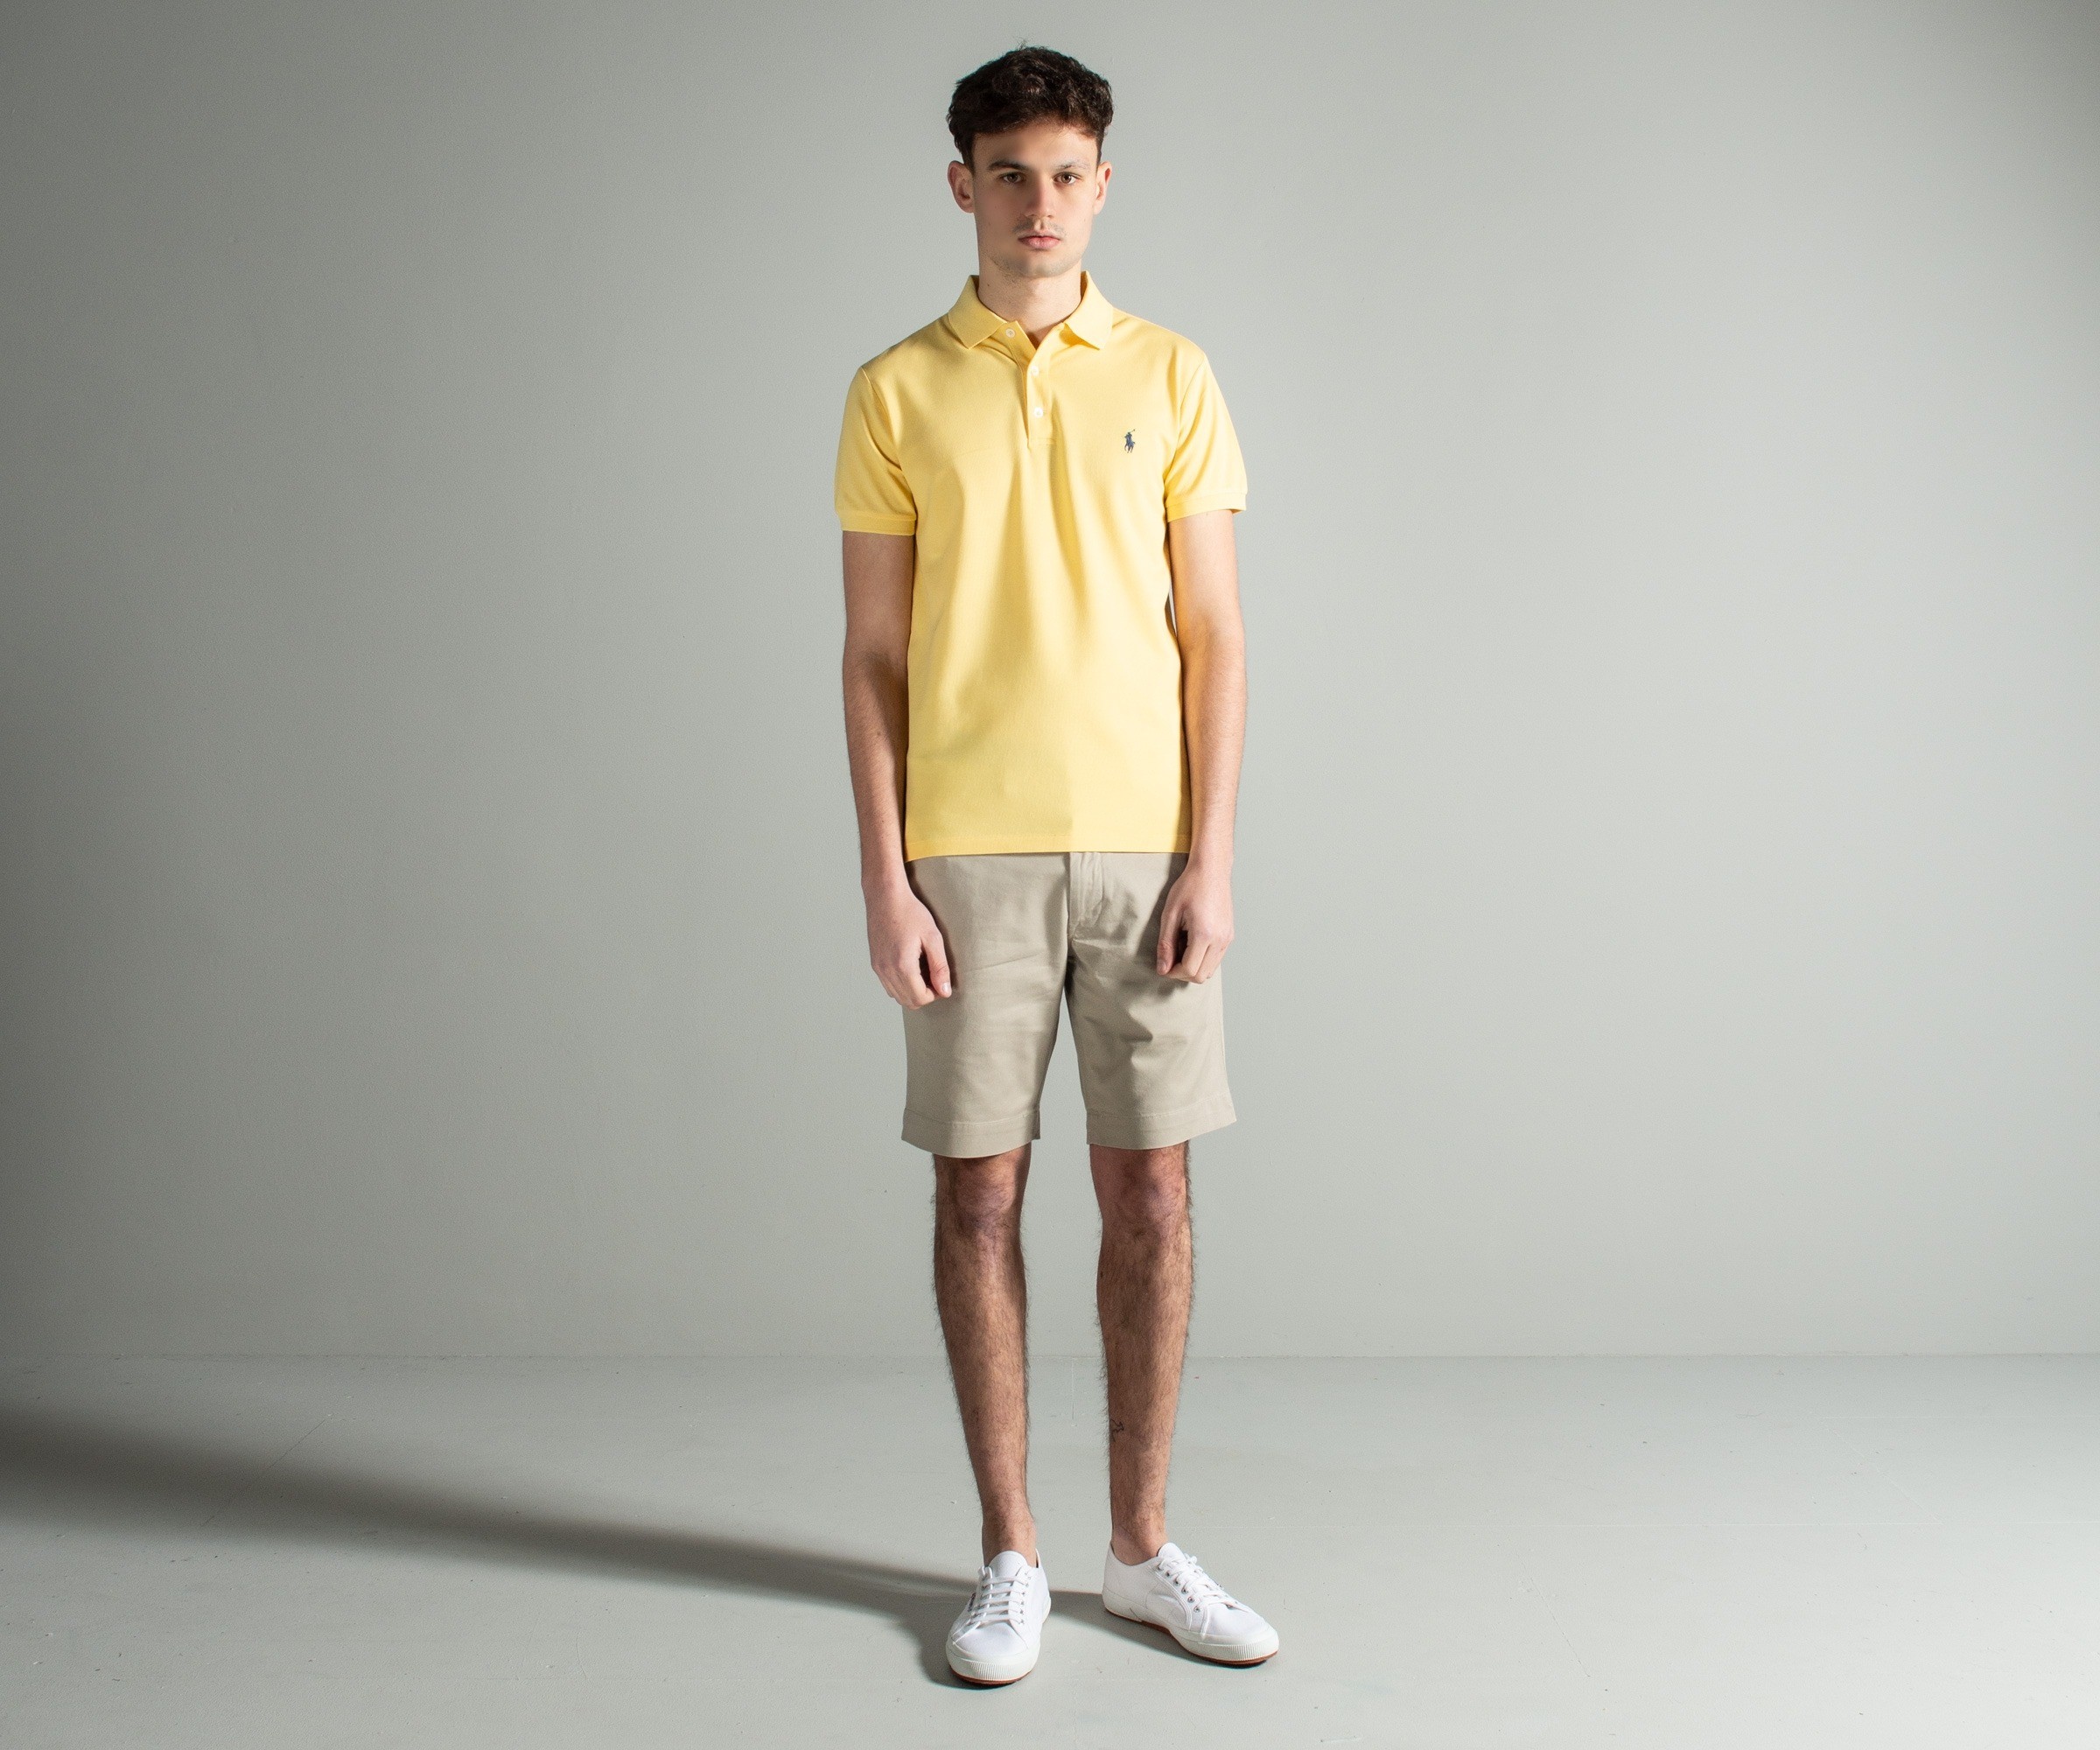 https://www.pockets.co.uk/media/catalog/product/cache/afca9a4301a4f957e27126911791b579/s/s/ss19-slim-fit-stretch-mesh-polo-yellow.jpg